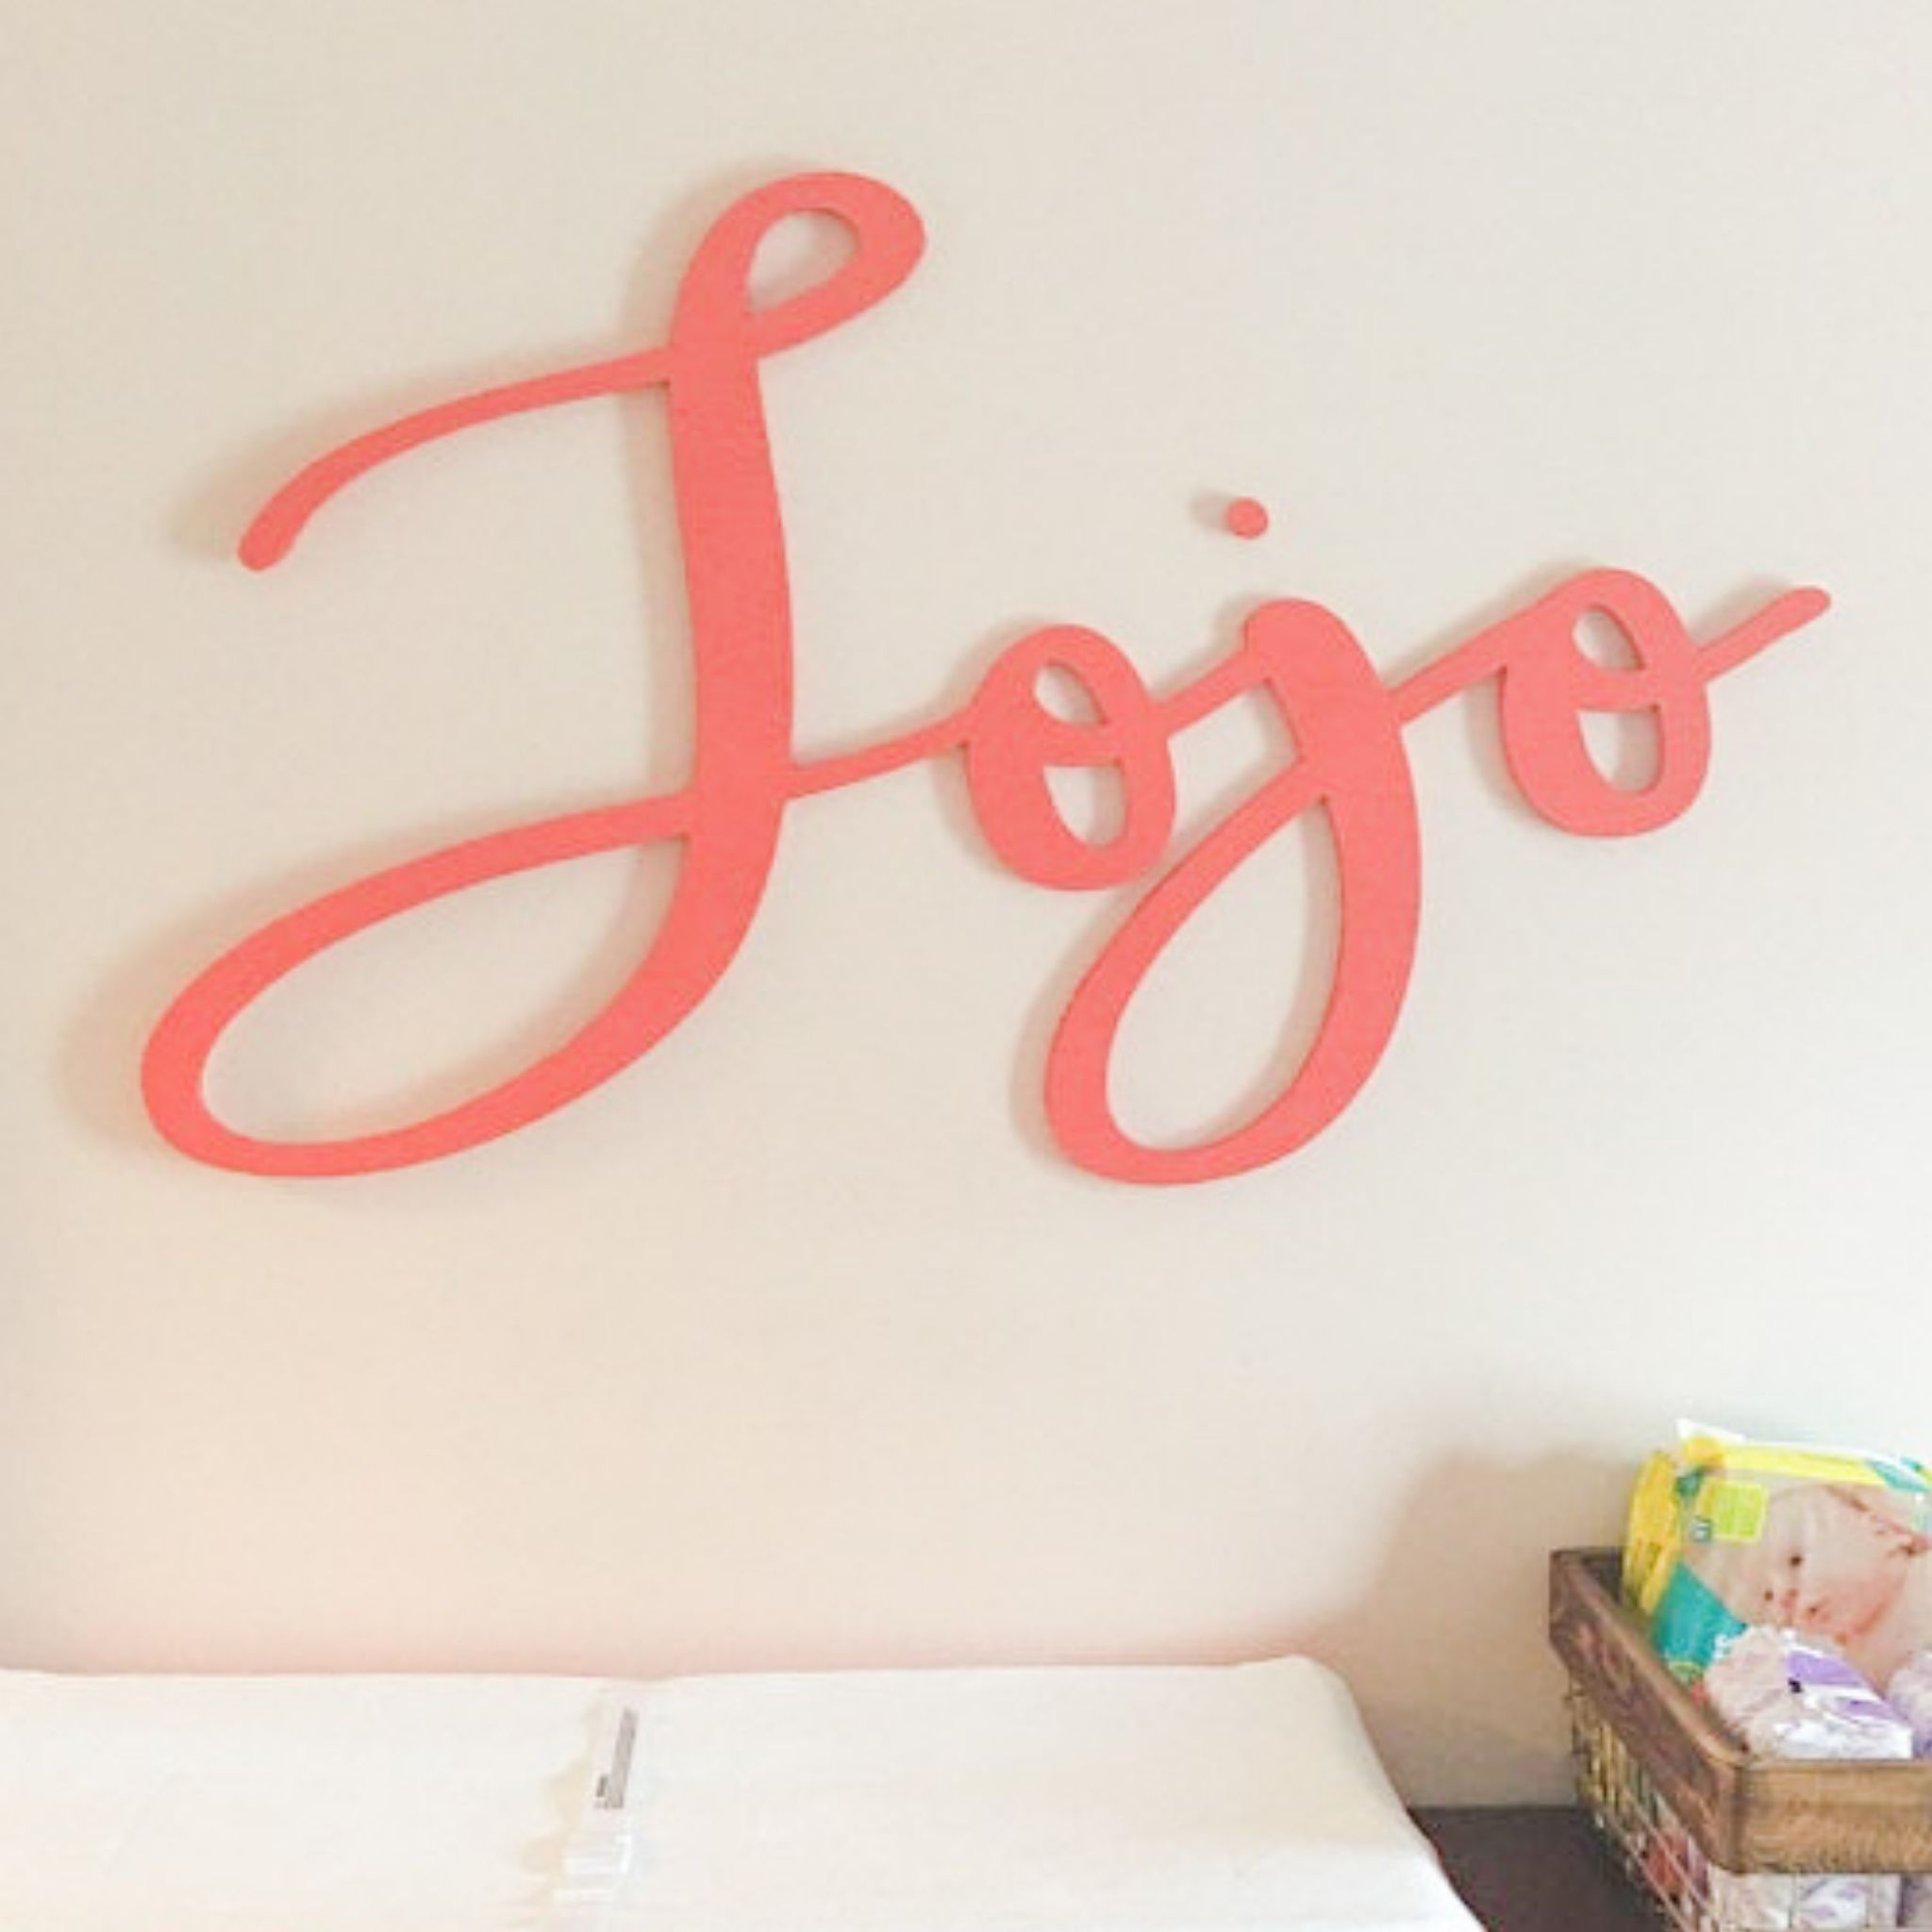 A custom wall hanging or name sign provides the perfect finishing touch to your child's nursery.